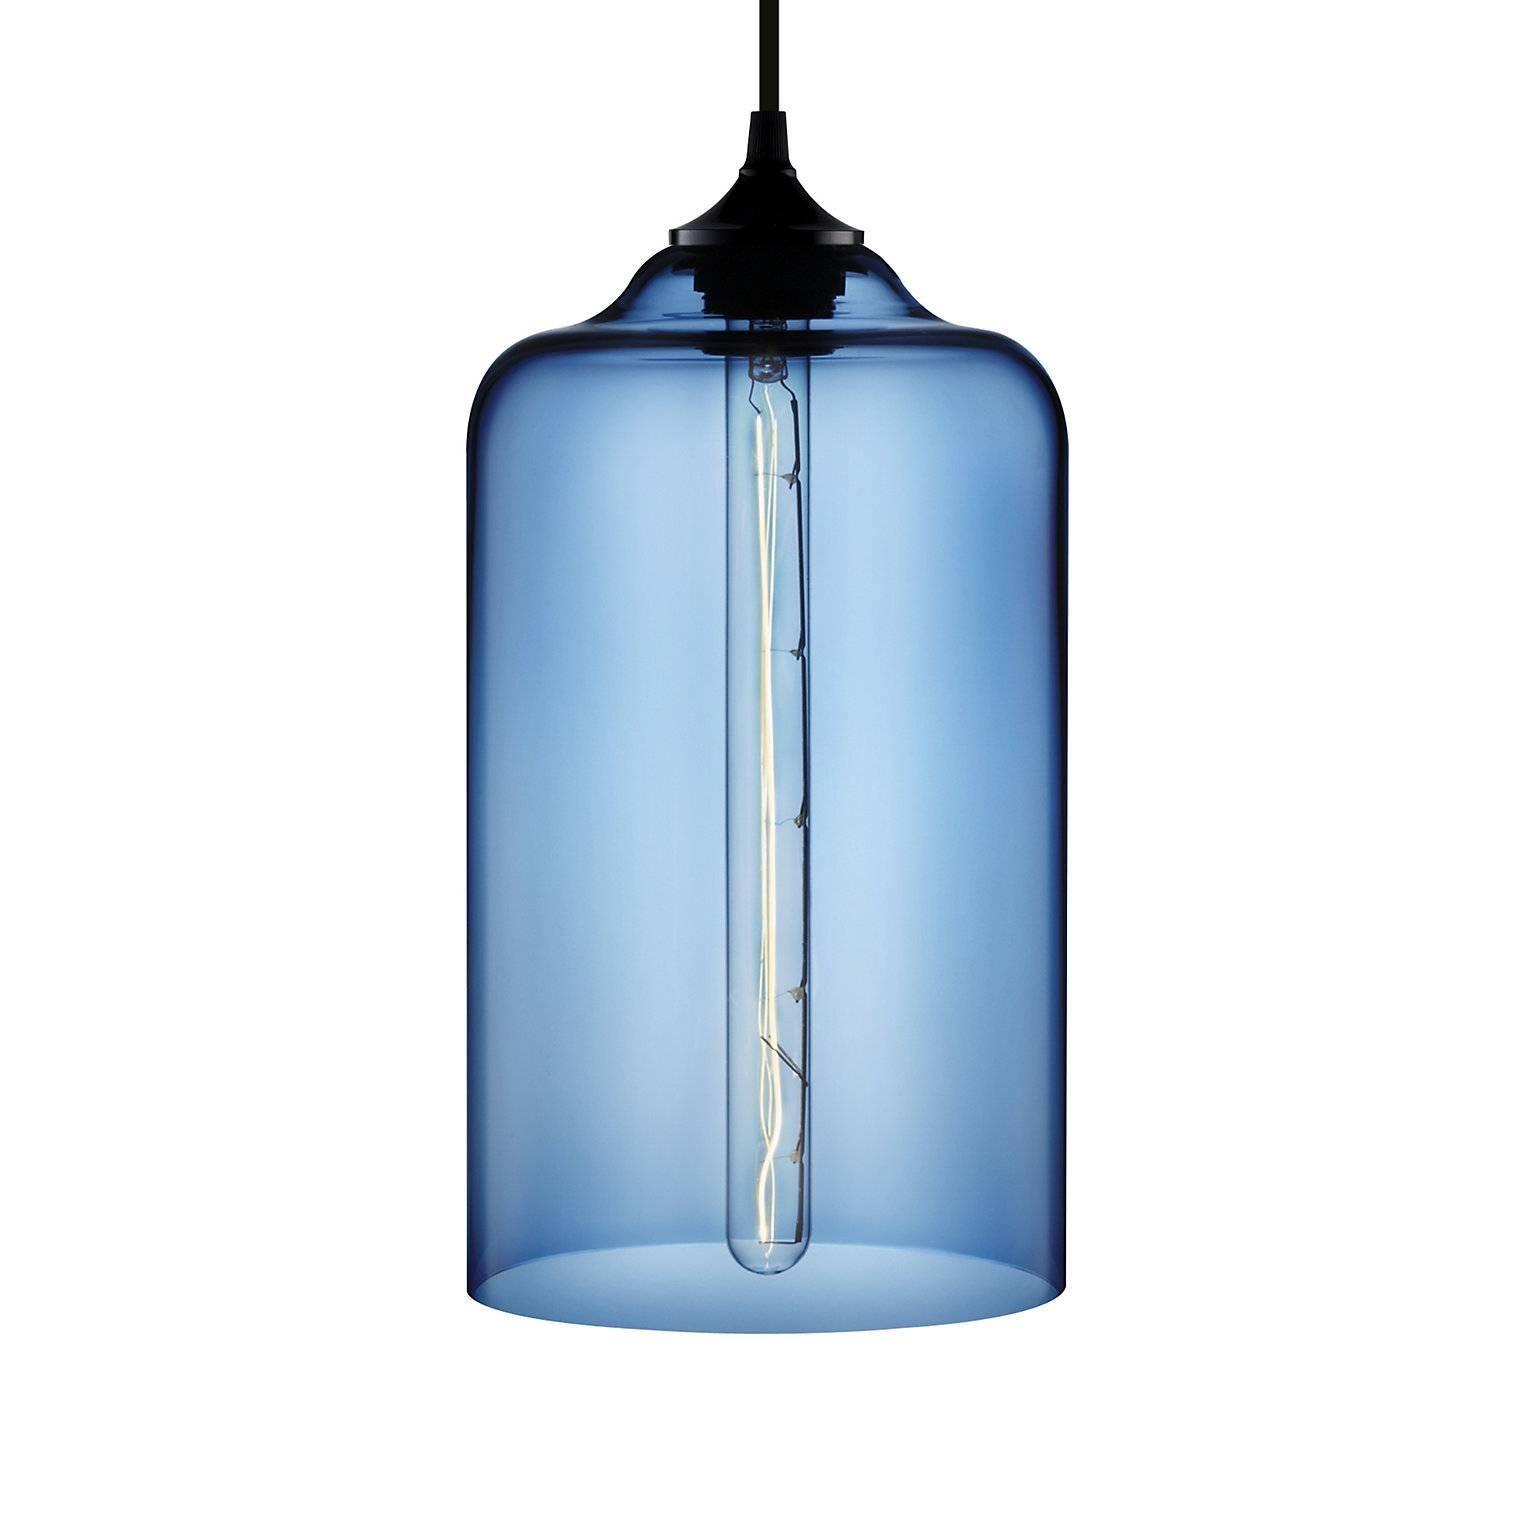 Bella Gray Handblown Modern Glass Pendant Light, Made in the USA In New Condition For Sale In Beacon, NY